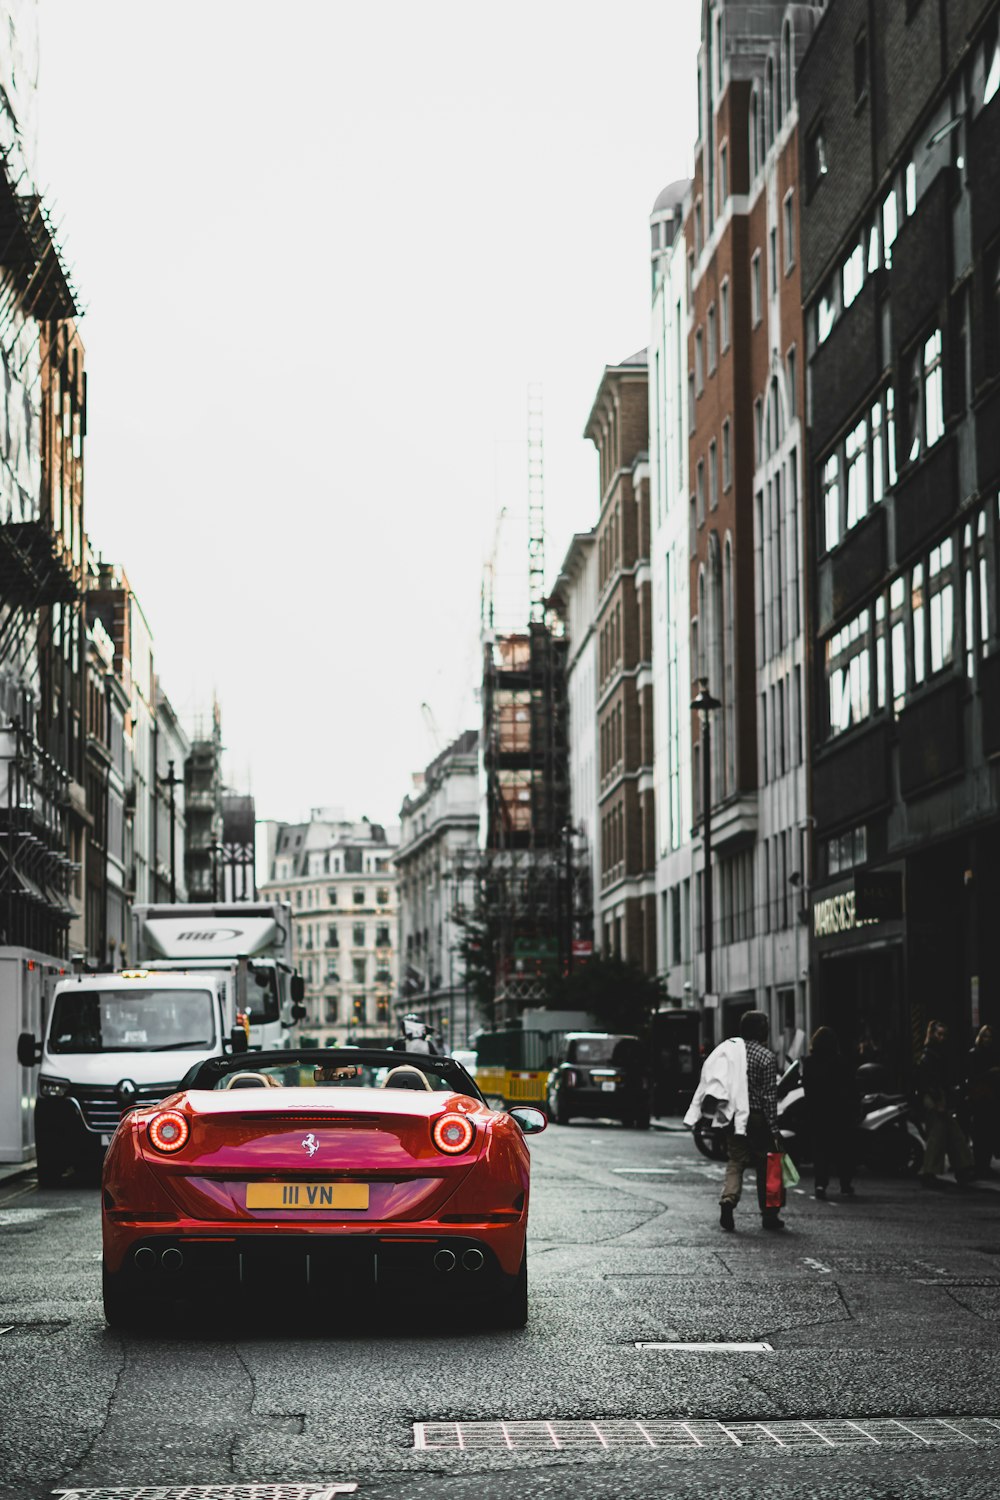 a red sports car parked on a city street